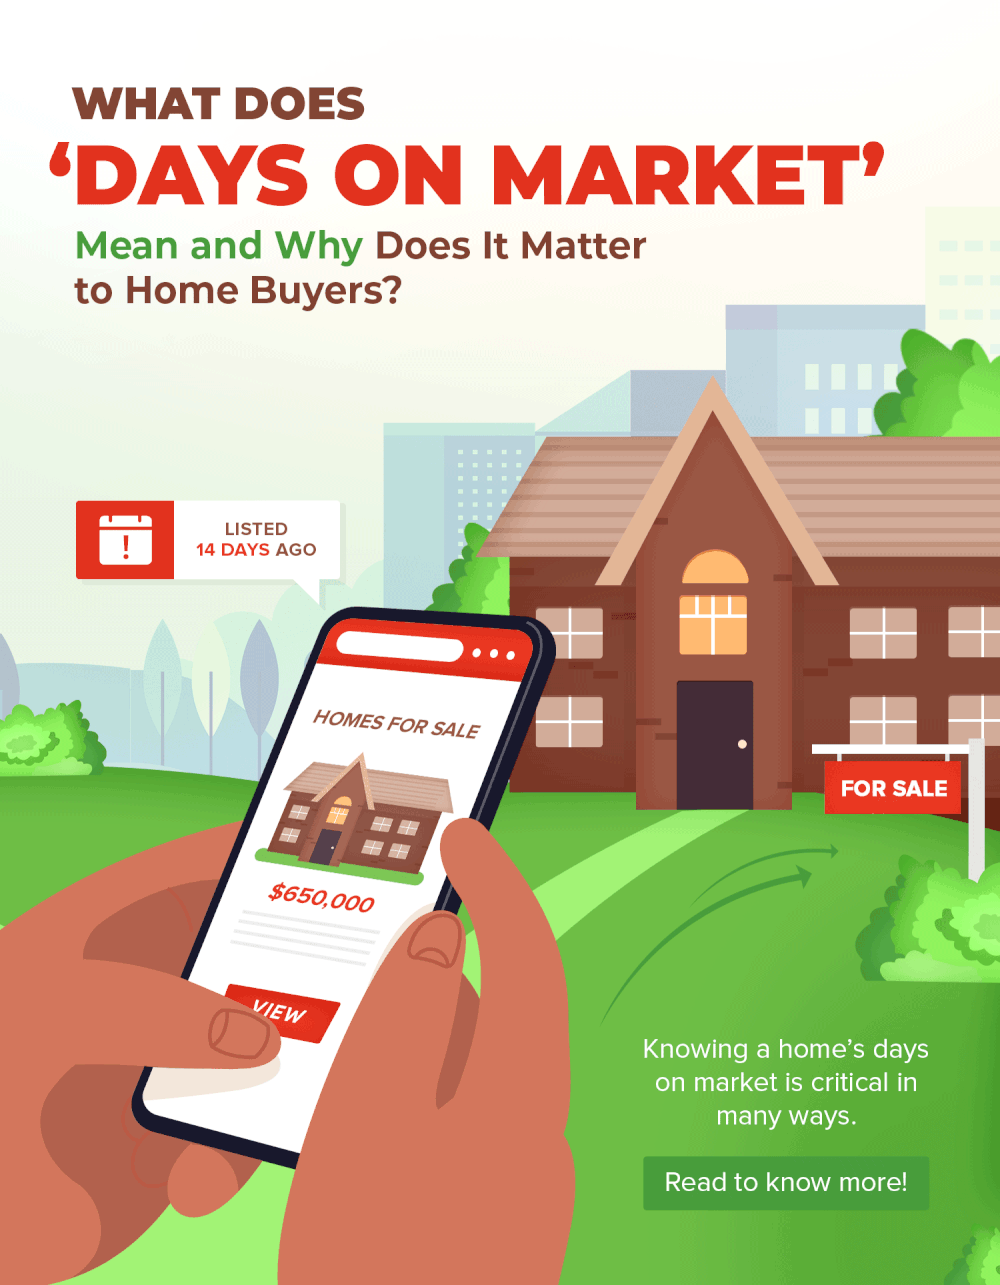 What Do Days On Market Mean to Home Buyers